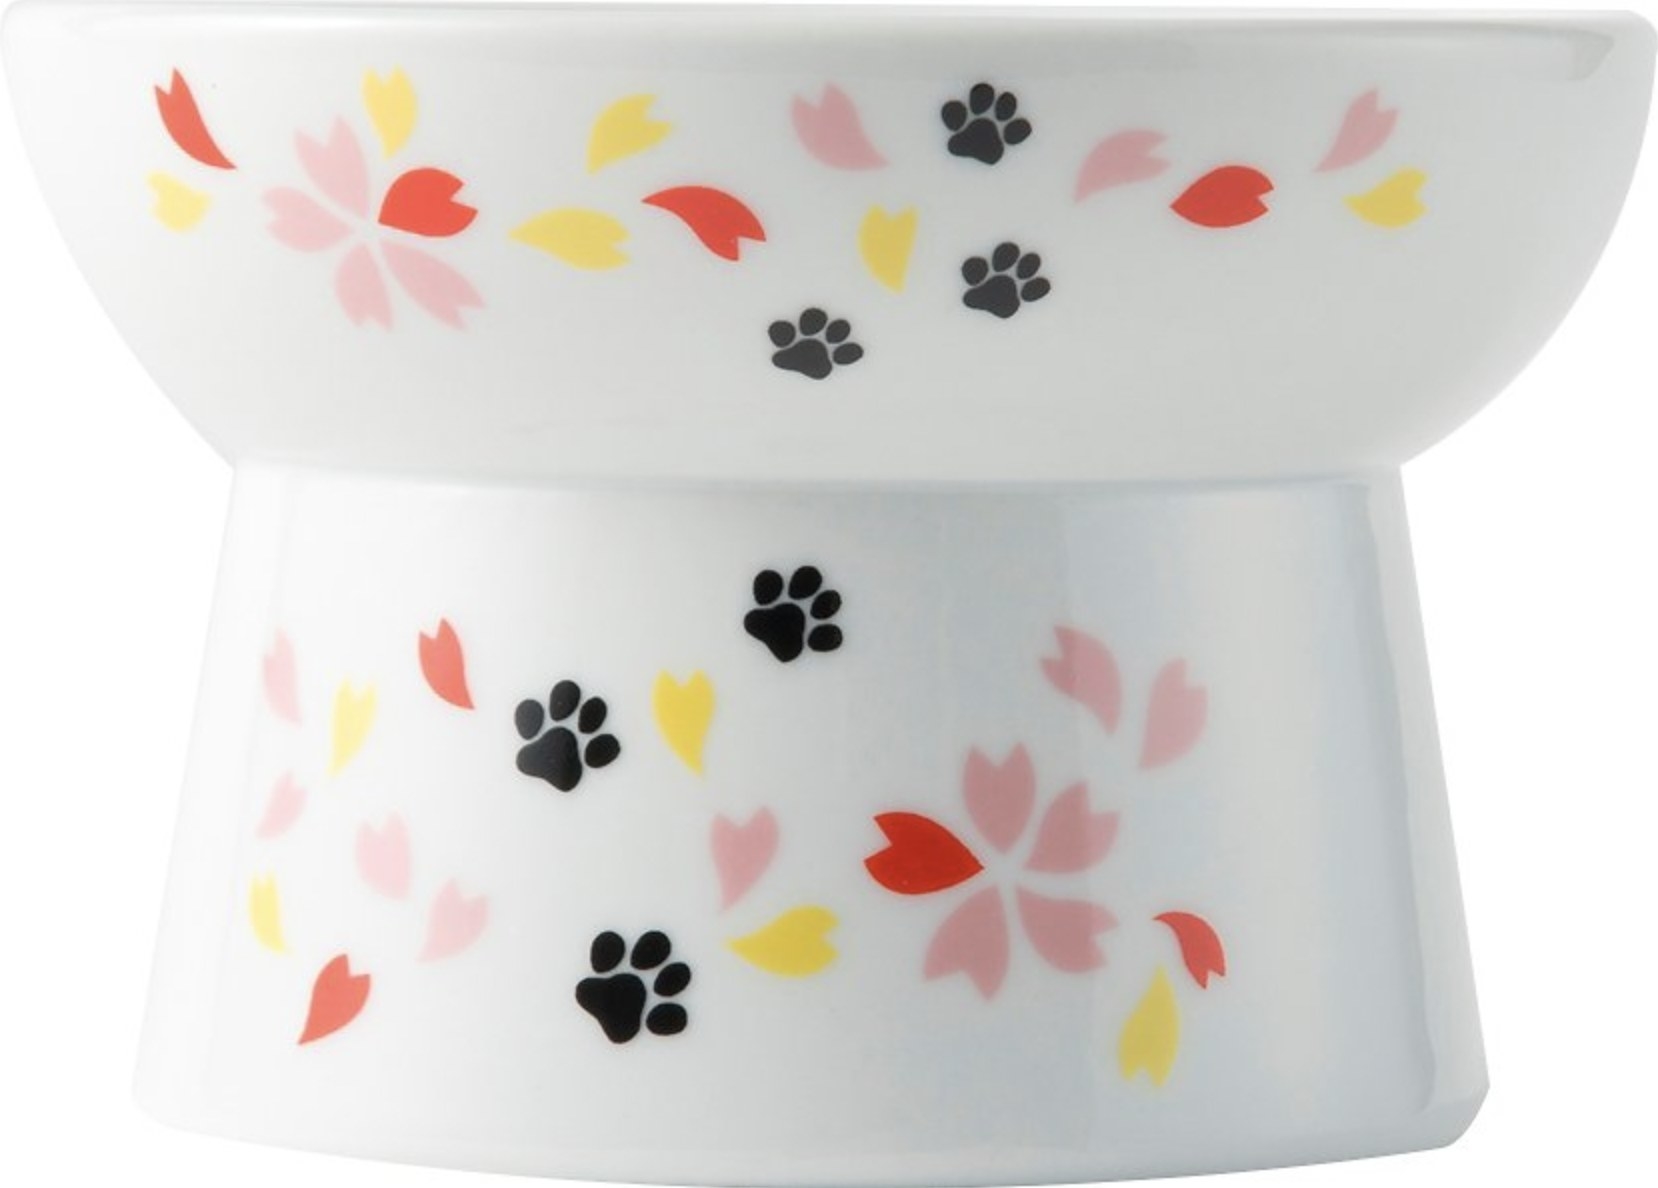 a raised food bowl with black paw prints and red, pink, and yellow leaves